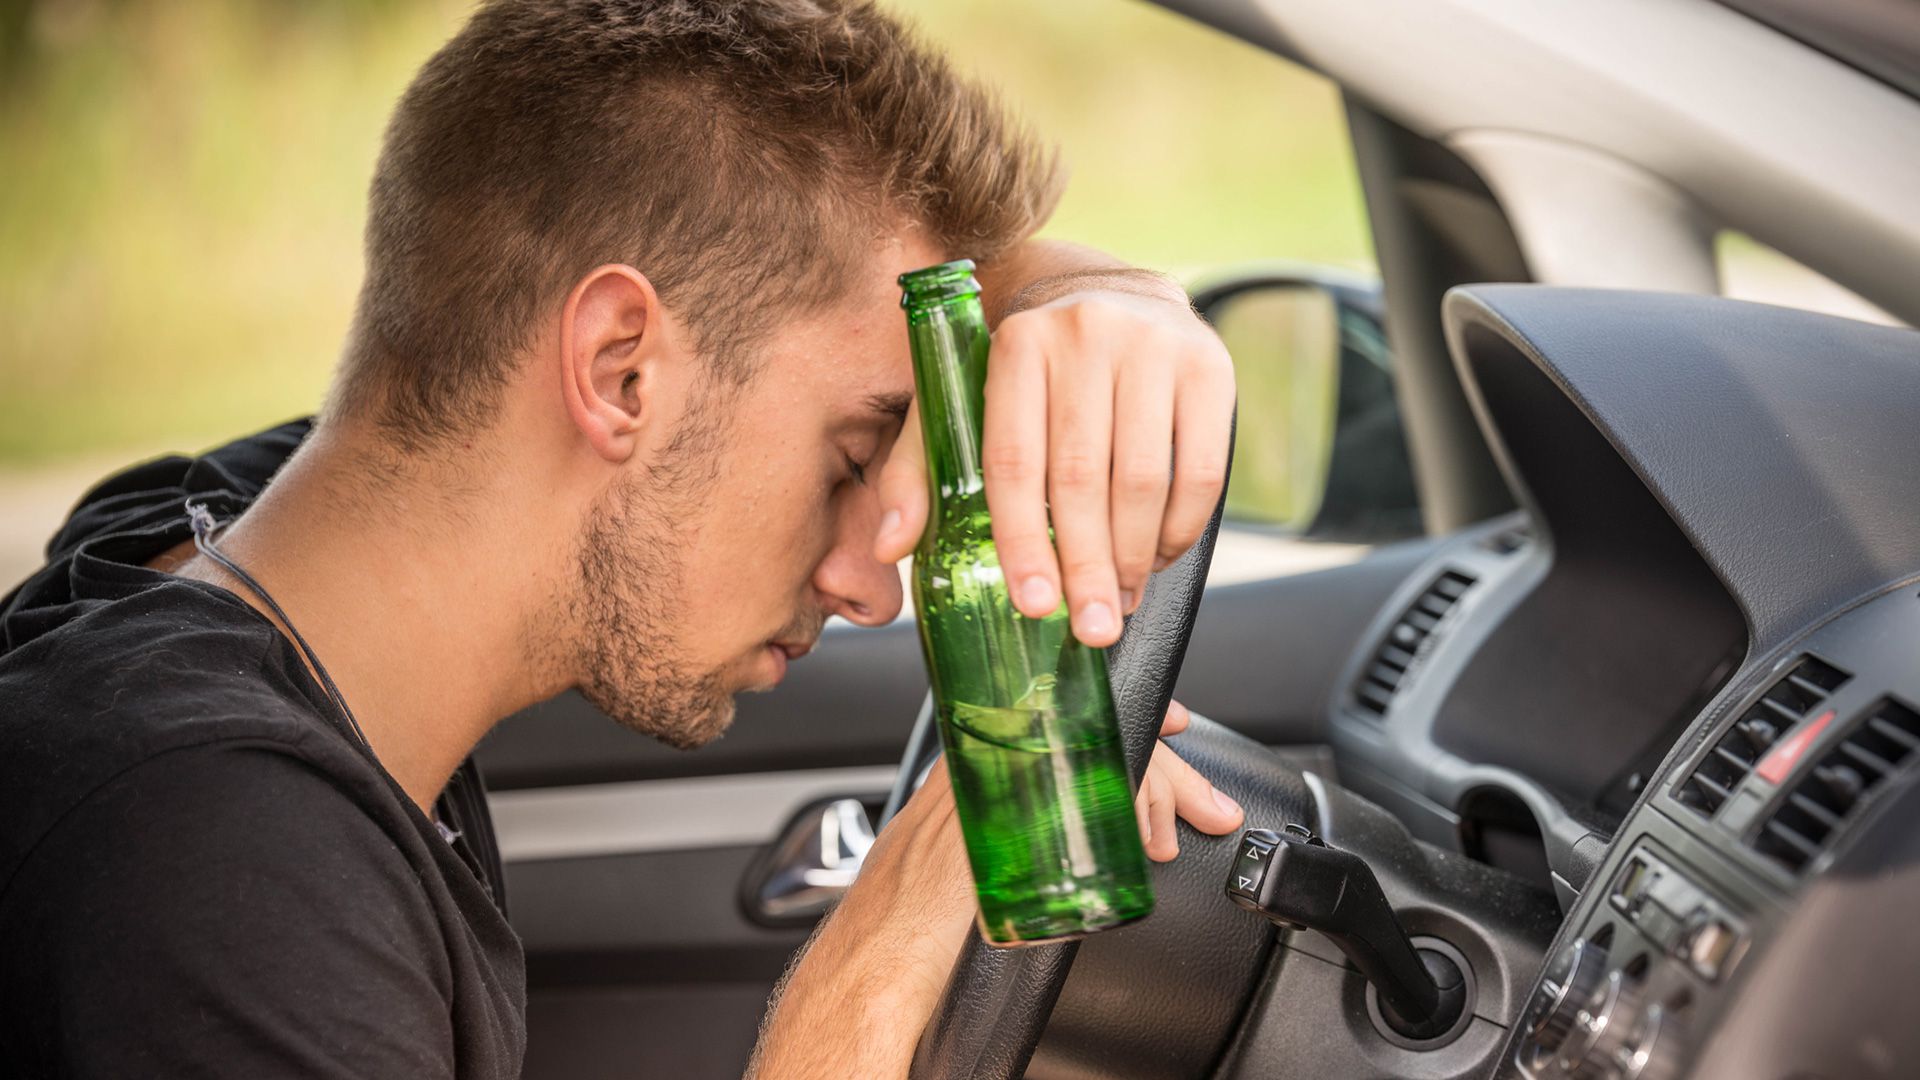 Adolescent alcohol use is closely linked to road traffic injuries, suicide attempts and death by suicide, according to PAHO/Getty